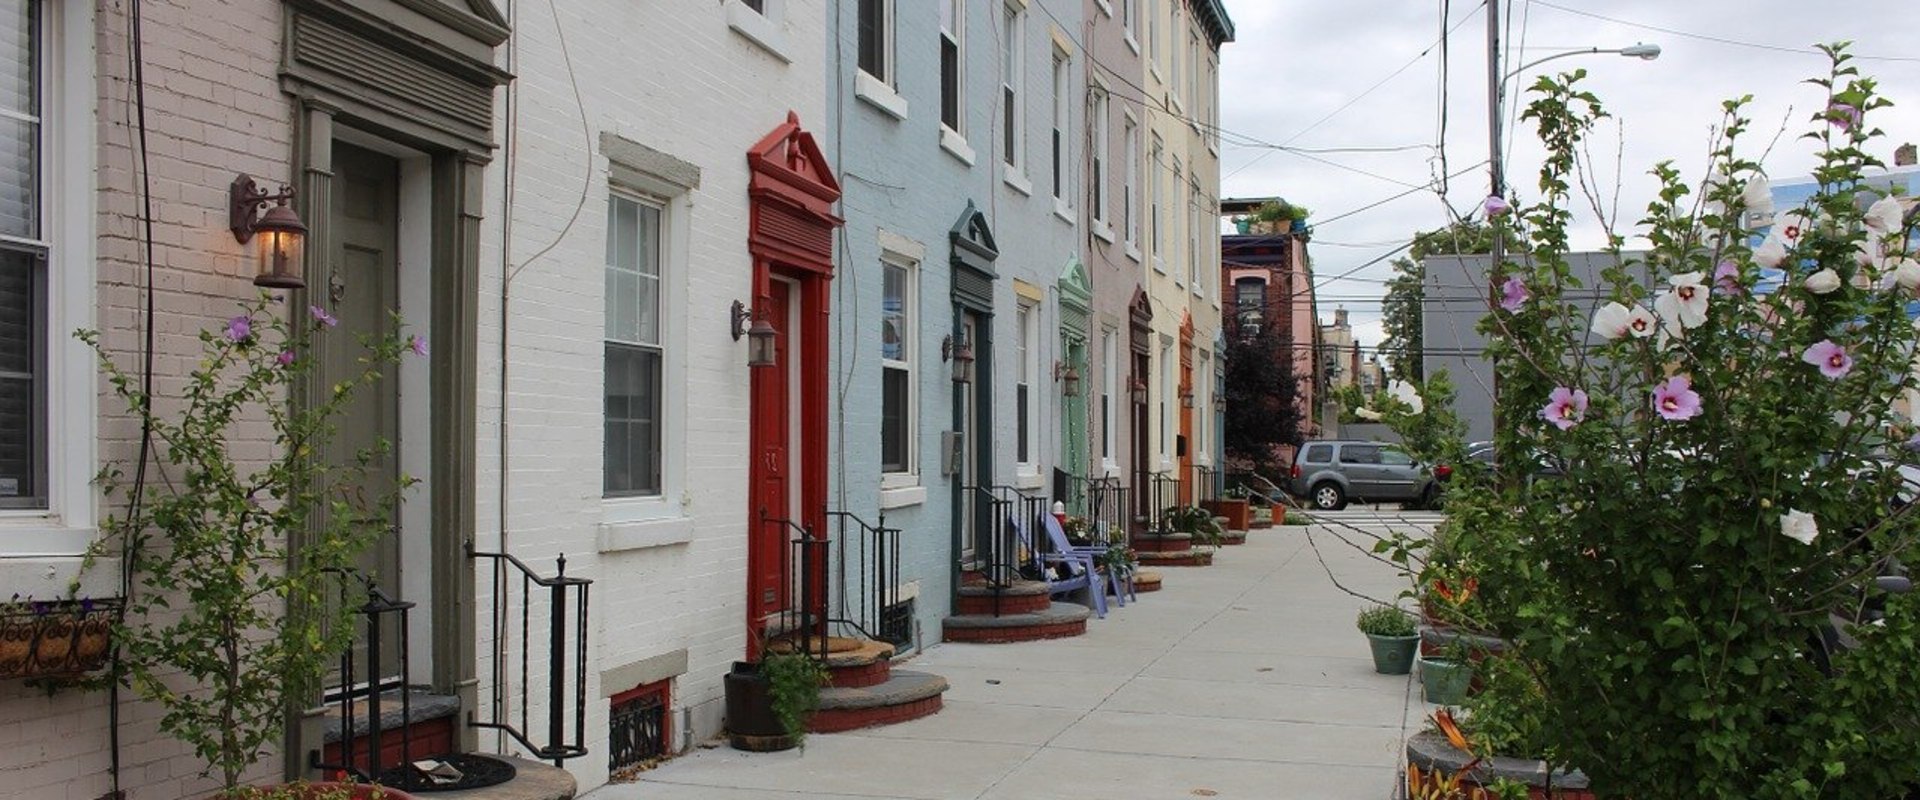 Selling Your Philadelphia Home: The Fast and Easy Way to Fix Structural Issues